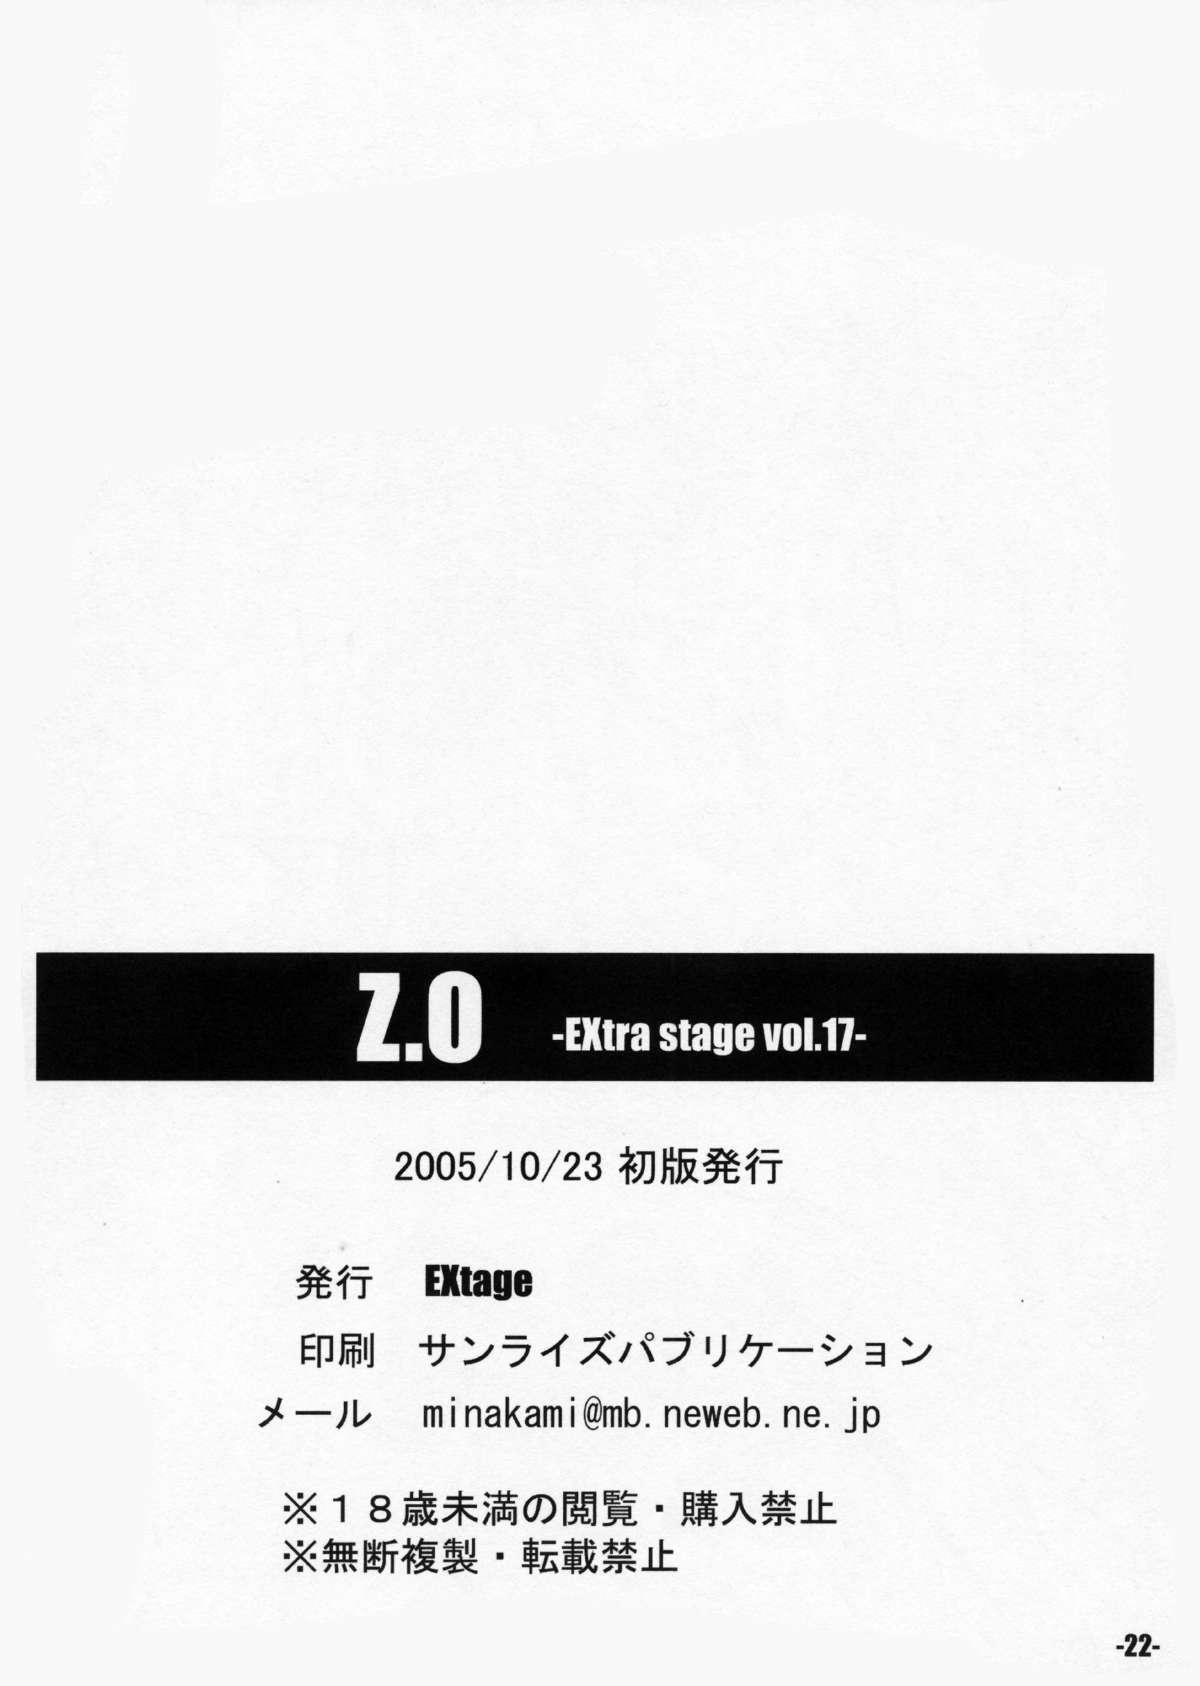 Tight EXtra stage vol.17 Z.O - Super robot wars Ikillitts - Page 22